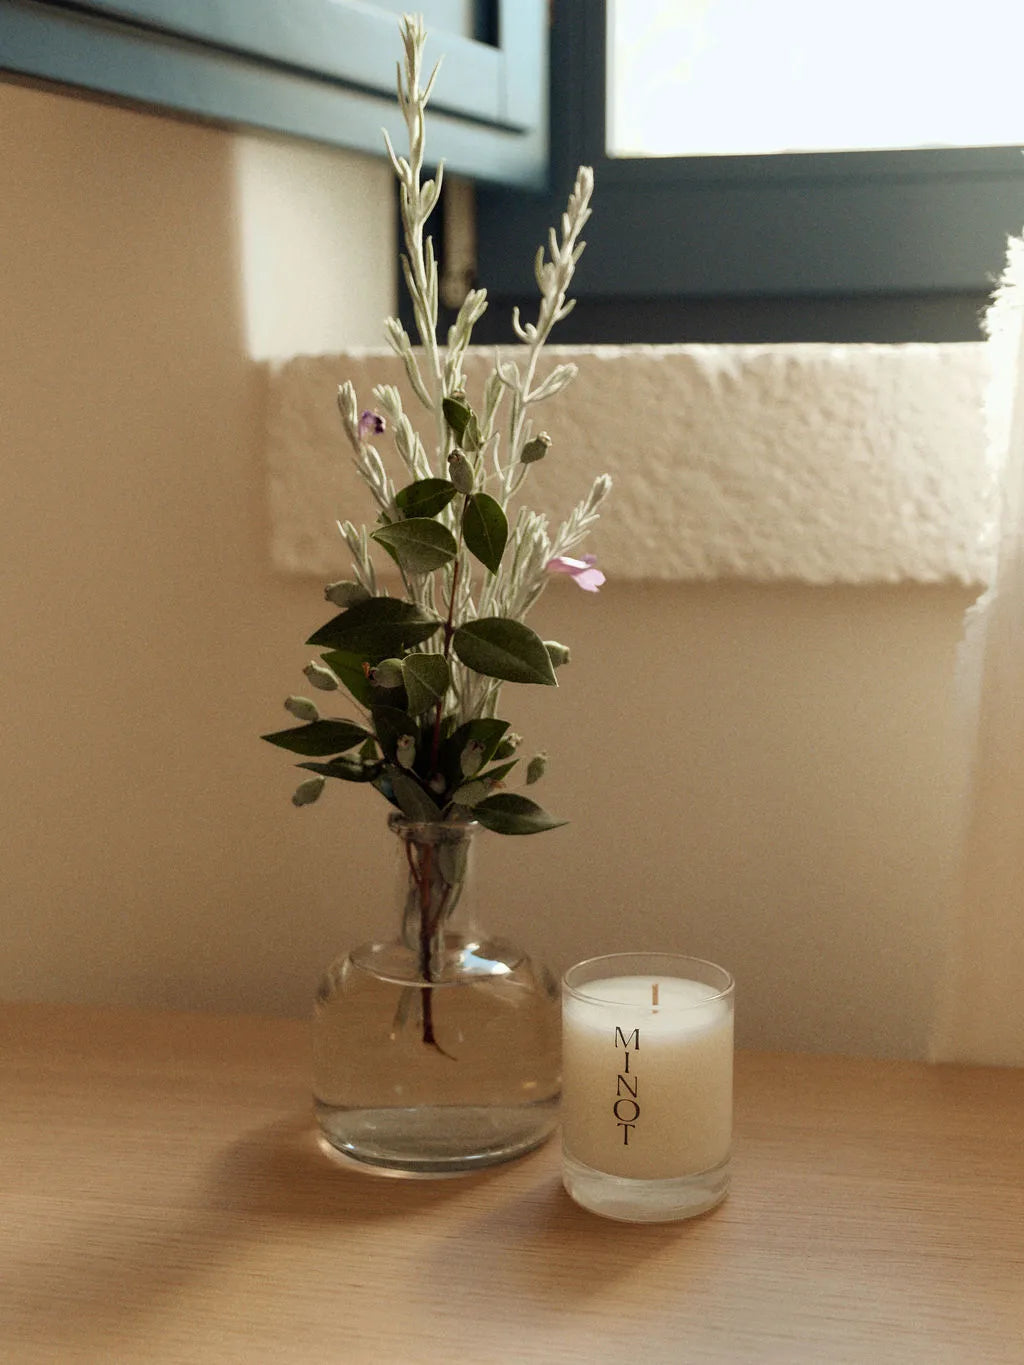 The eco-friendly Luna Mini candle sits next to a small bouquet of soft greenery and purple flowers